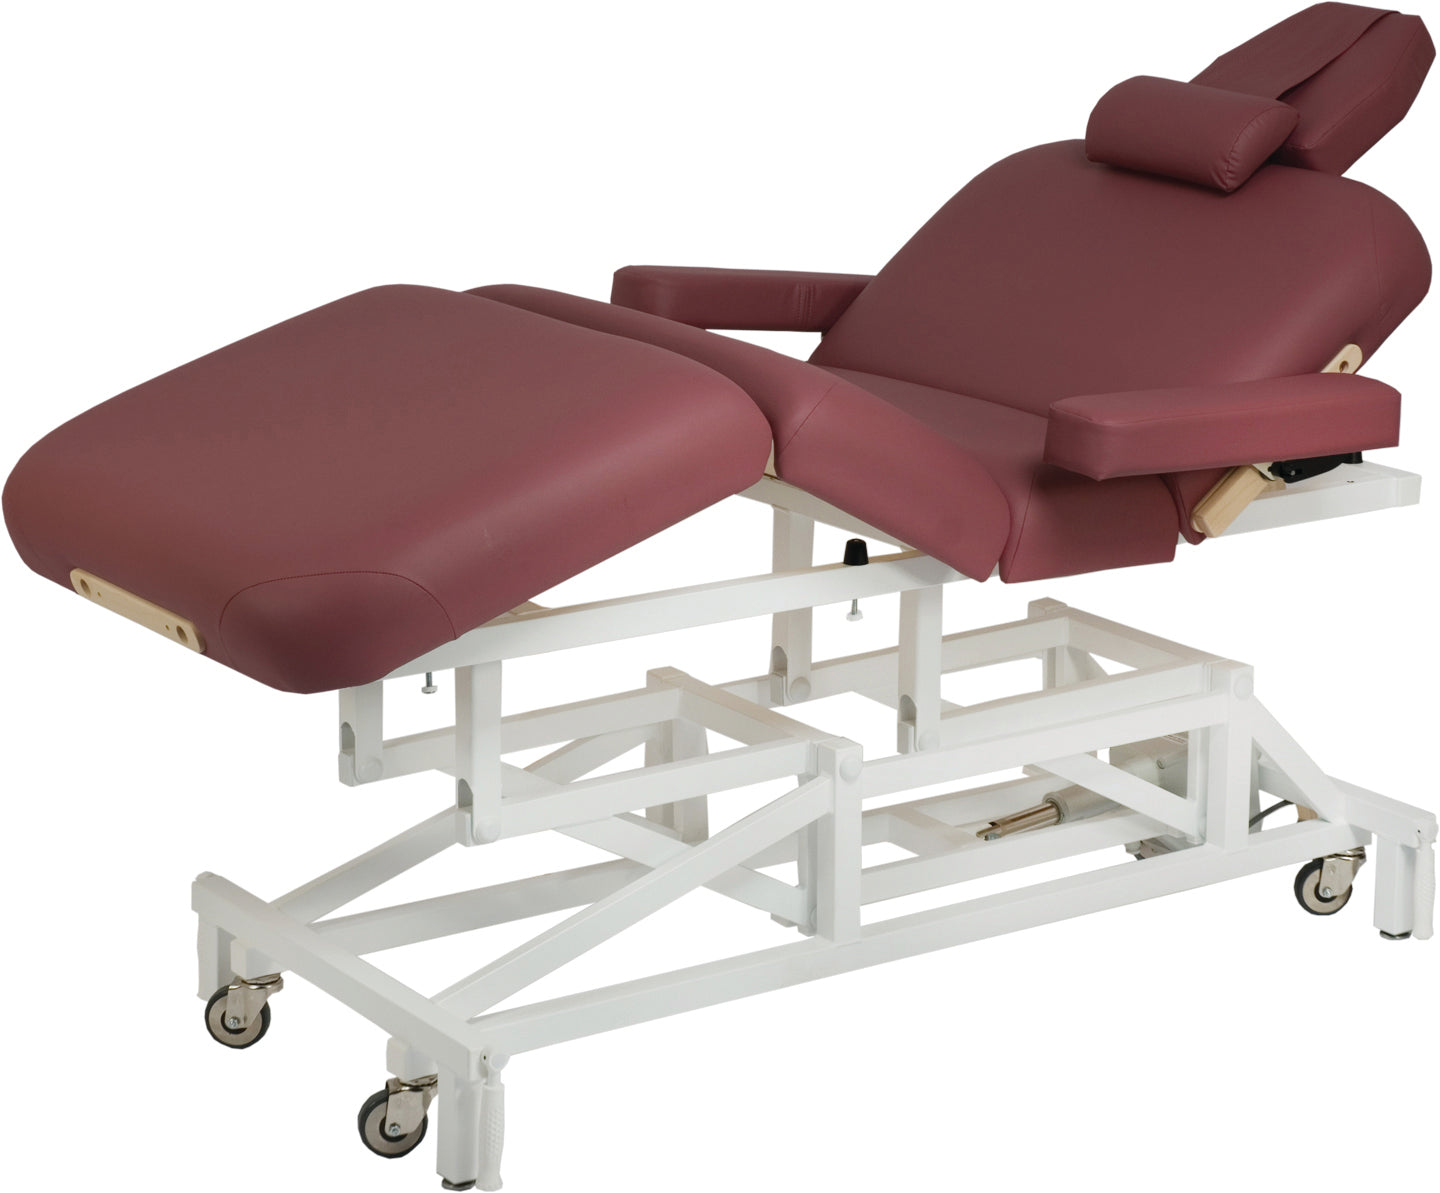 Custom Craftworks - McKenzie Deluxe Electric Lift Massage Table - Superb Massage Tables